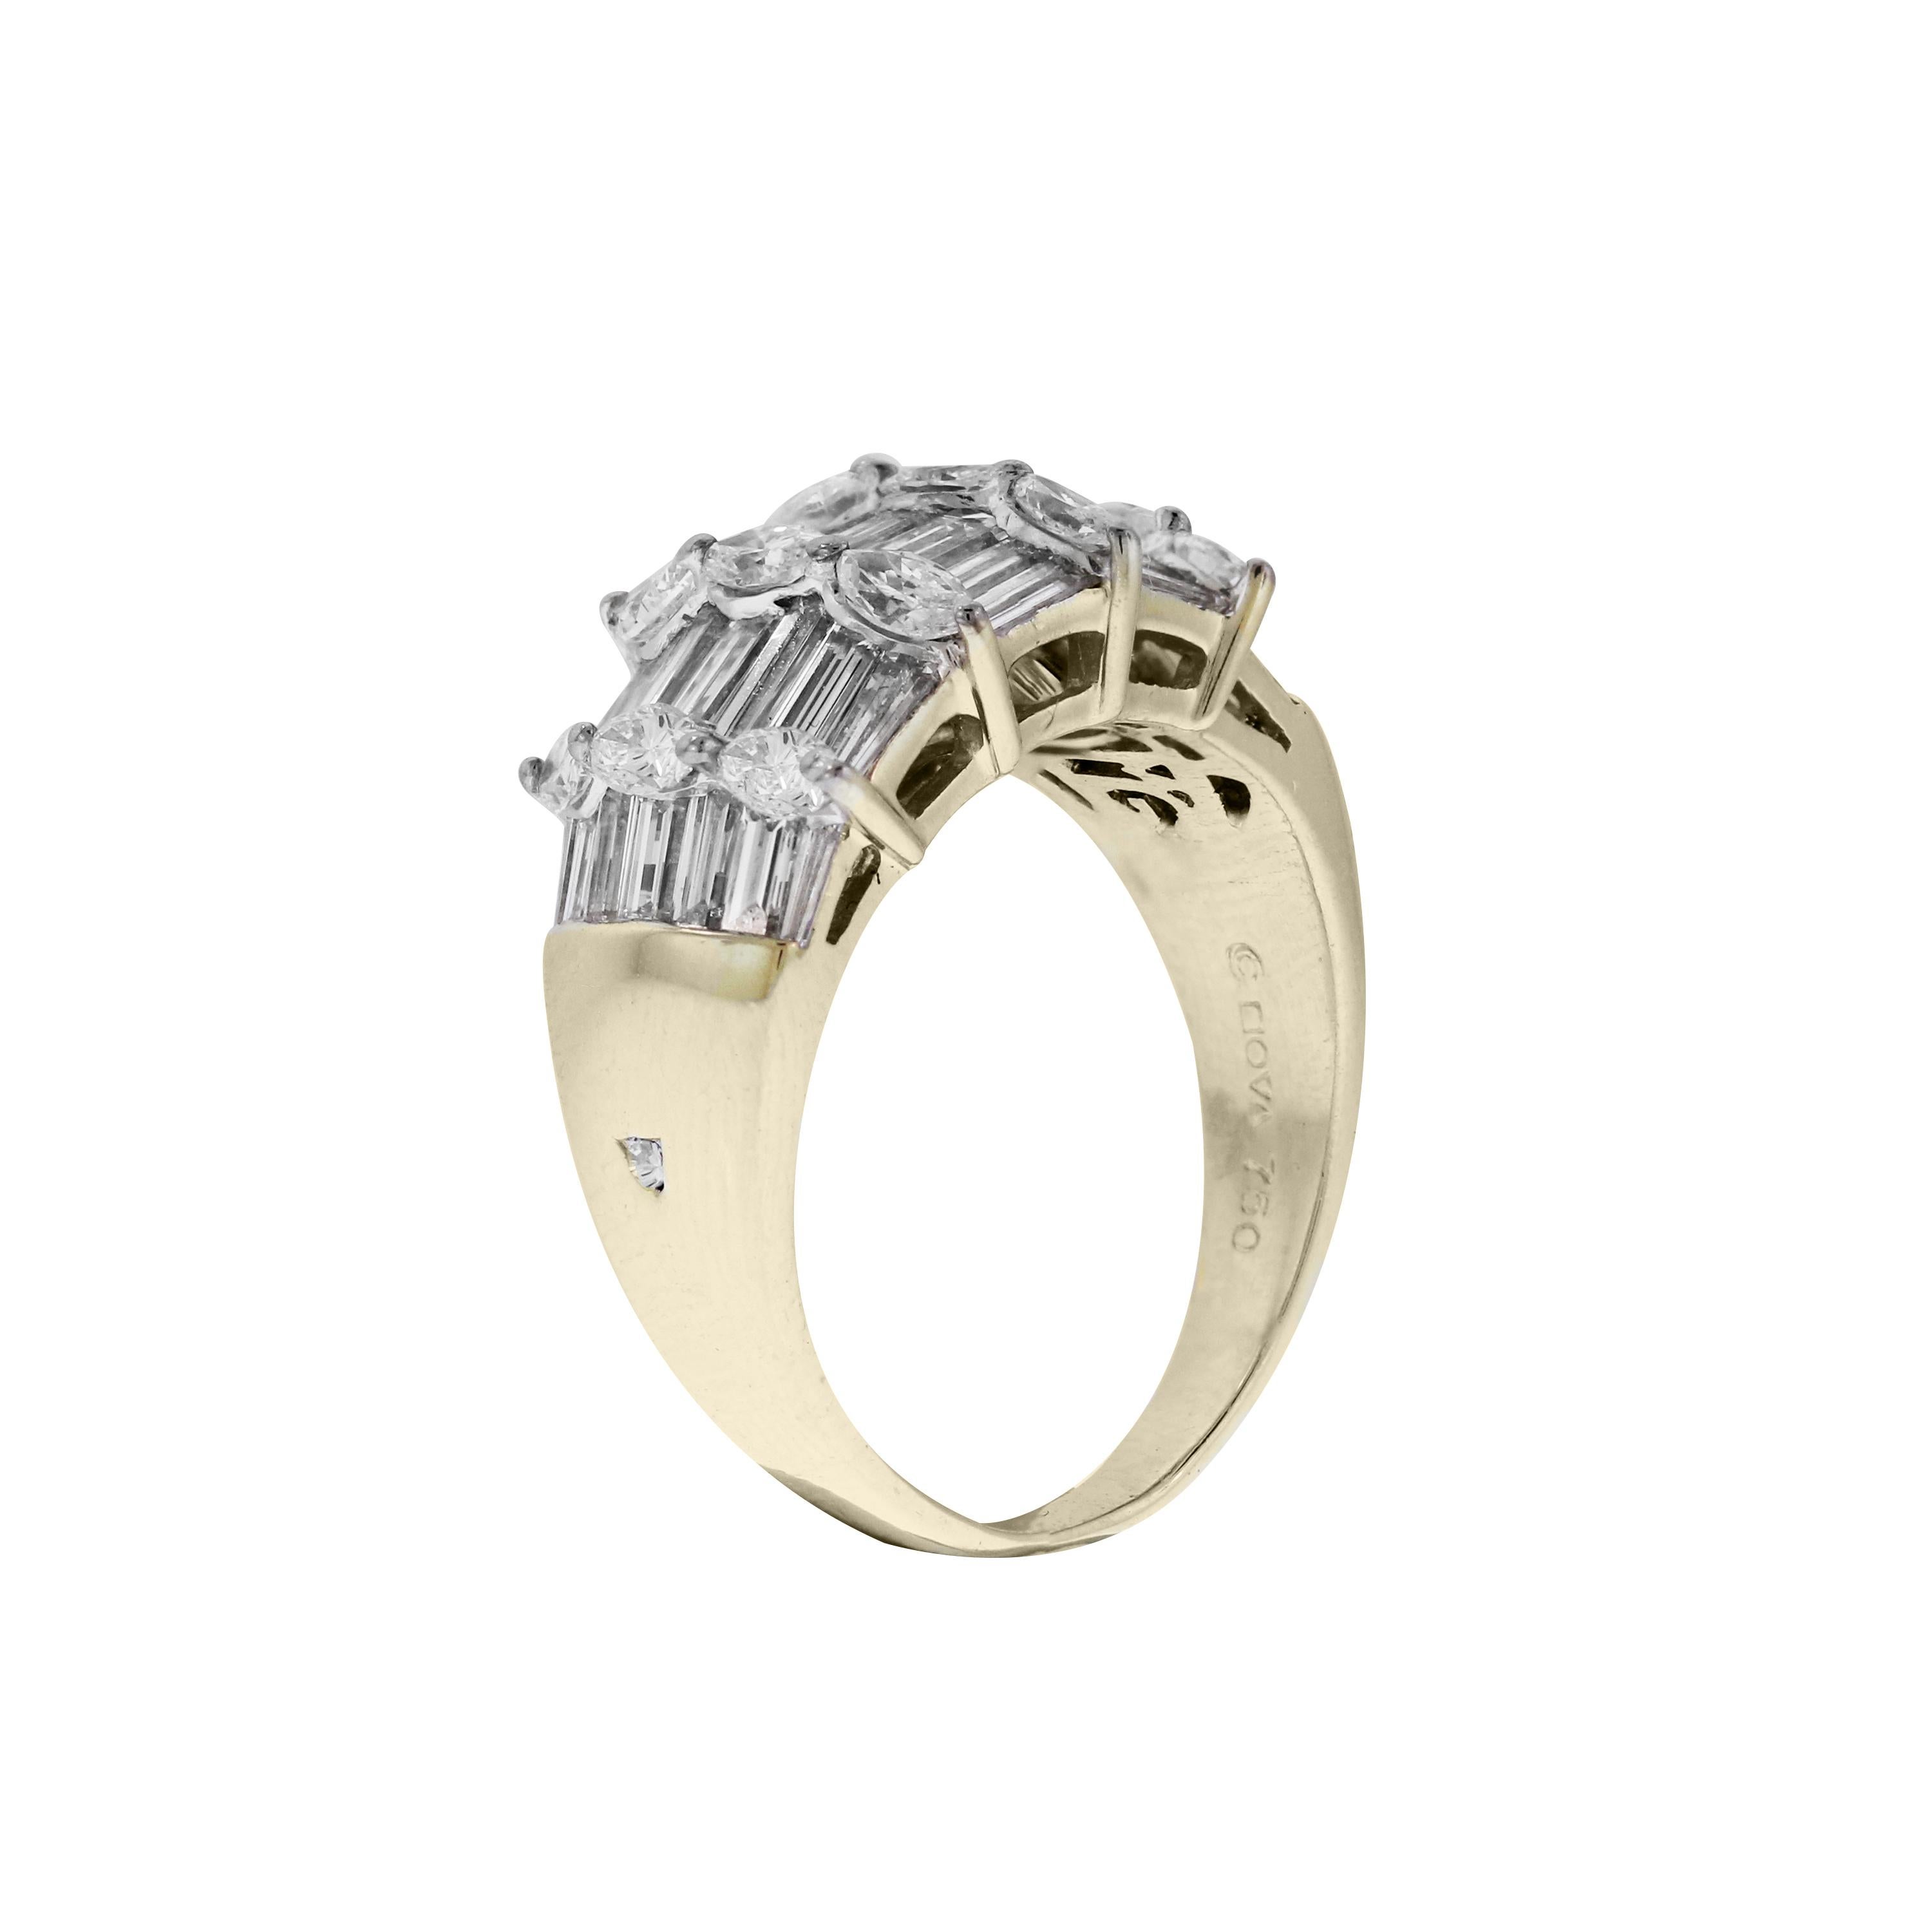 18K Yellow Gold Ring with Baguette and Round Diamonds

Apprx. 3 carat G color VS clarity Baguette and Round diamonds total weight

Ring face is 0.45 inch width and 6mm band width

Ring is a size 9.25. Sizable